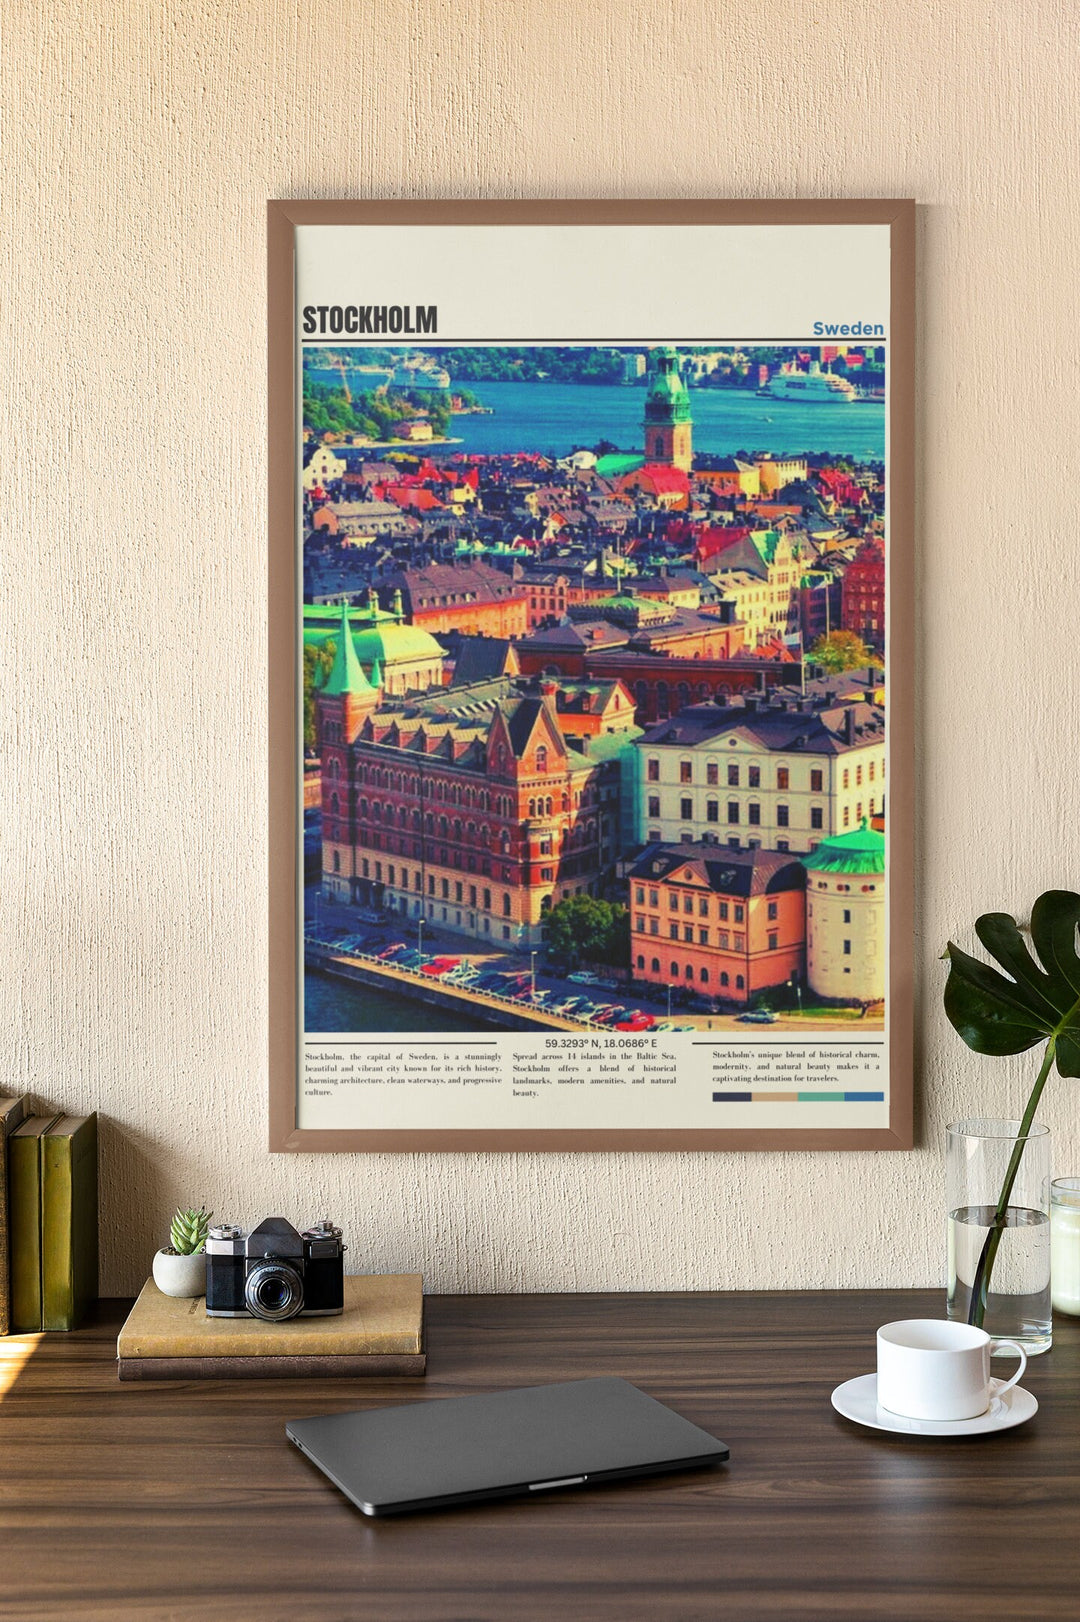 a picture of a city is hanging on a wall